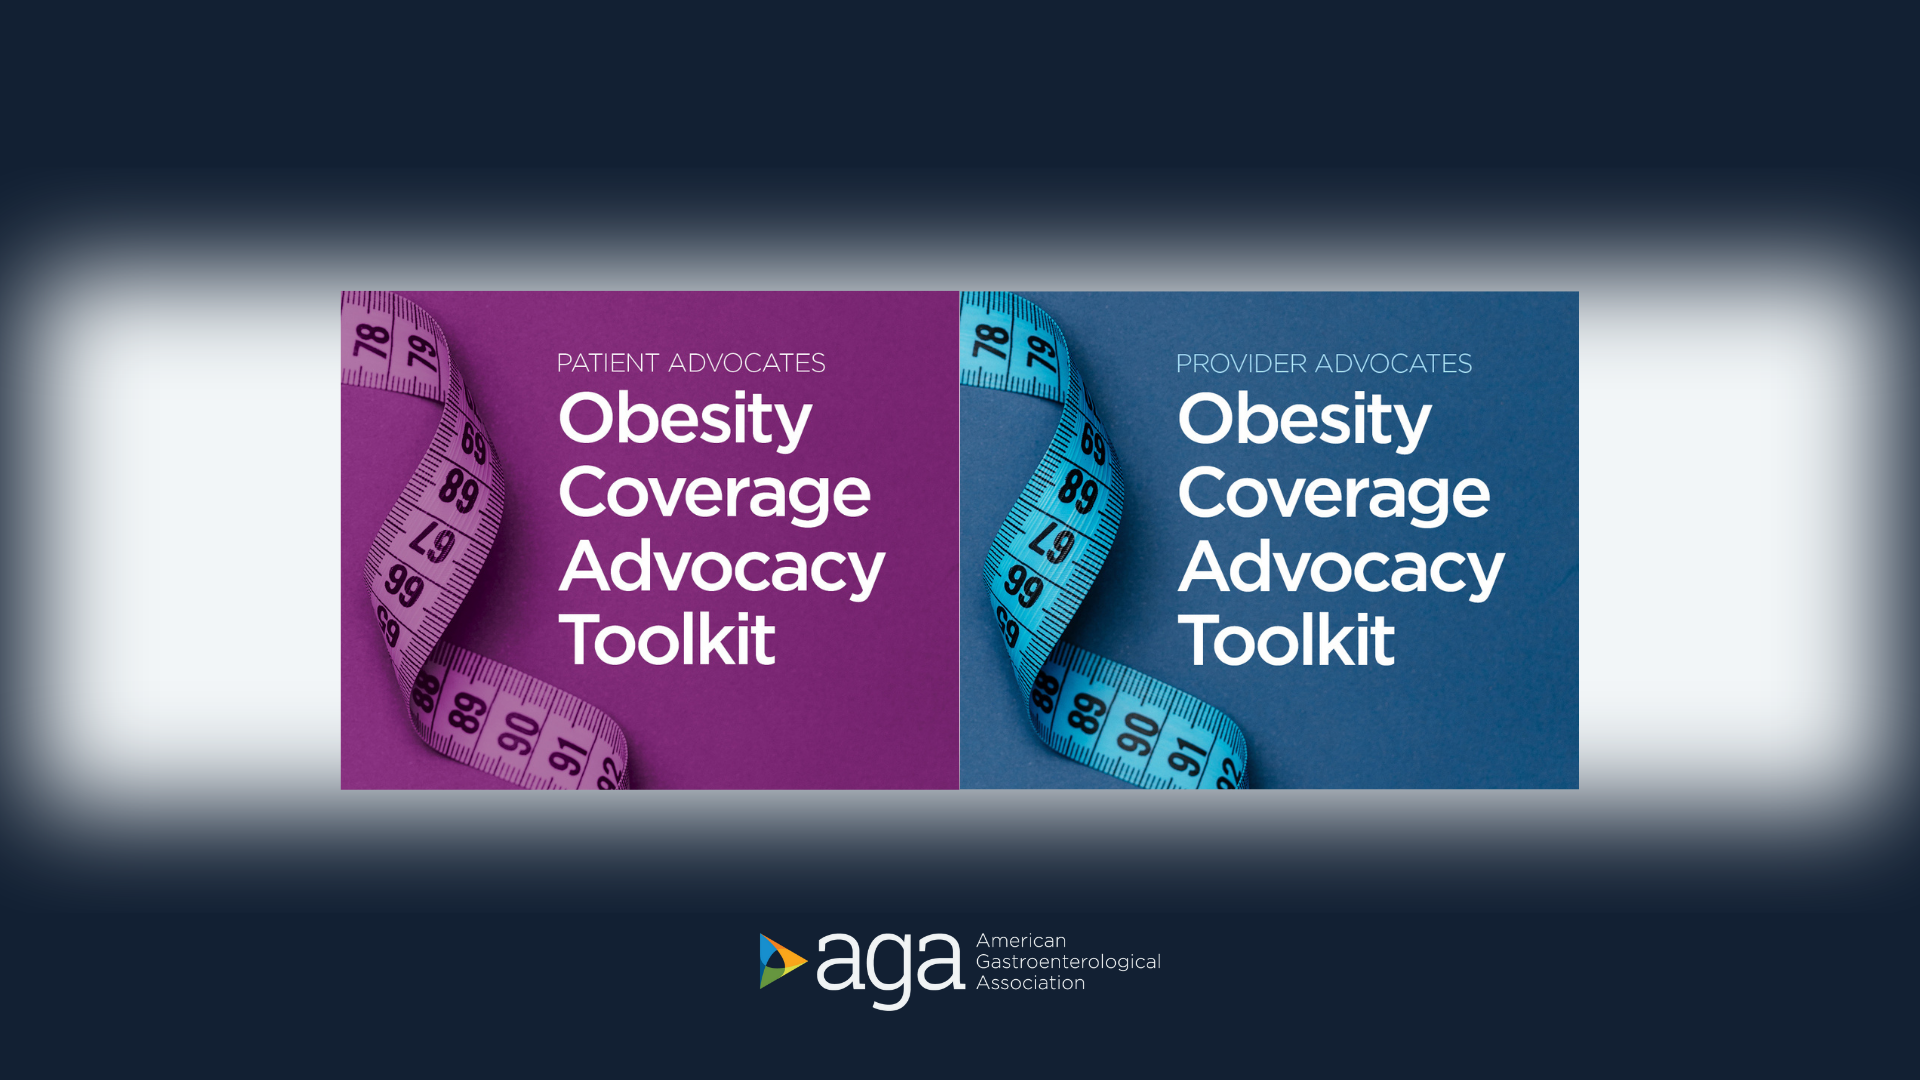 Take action using our new obesity advocacy toolkit - American